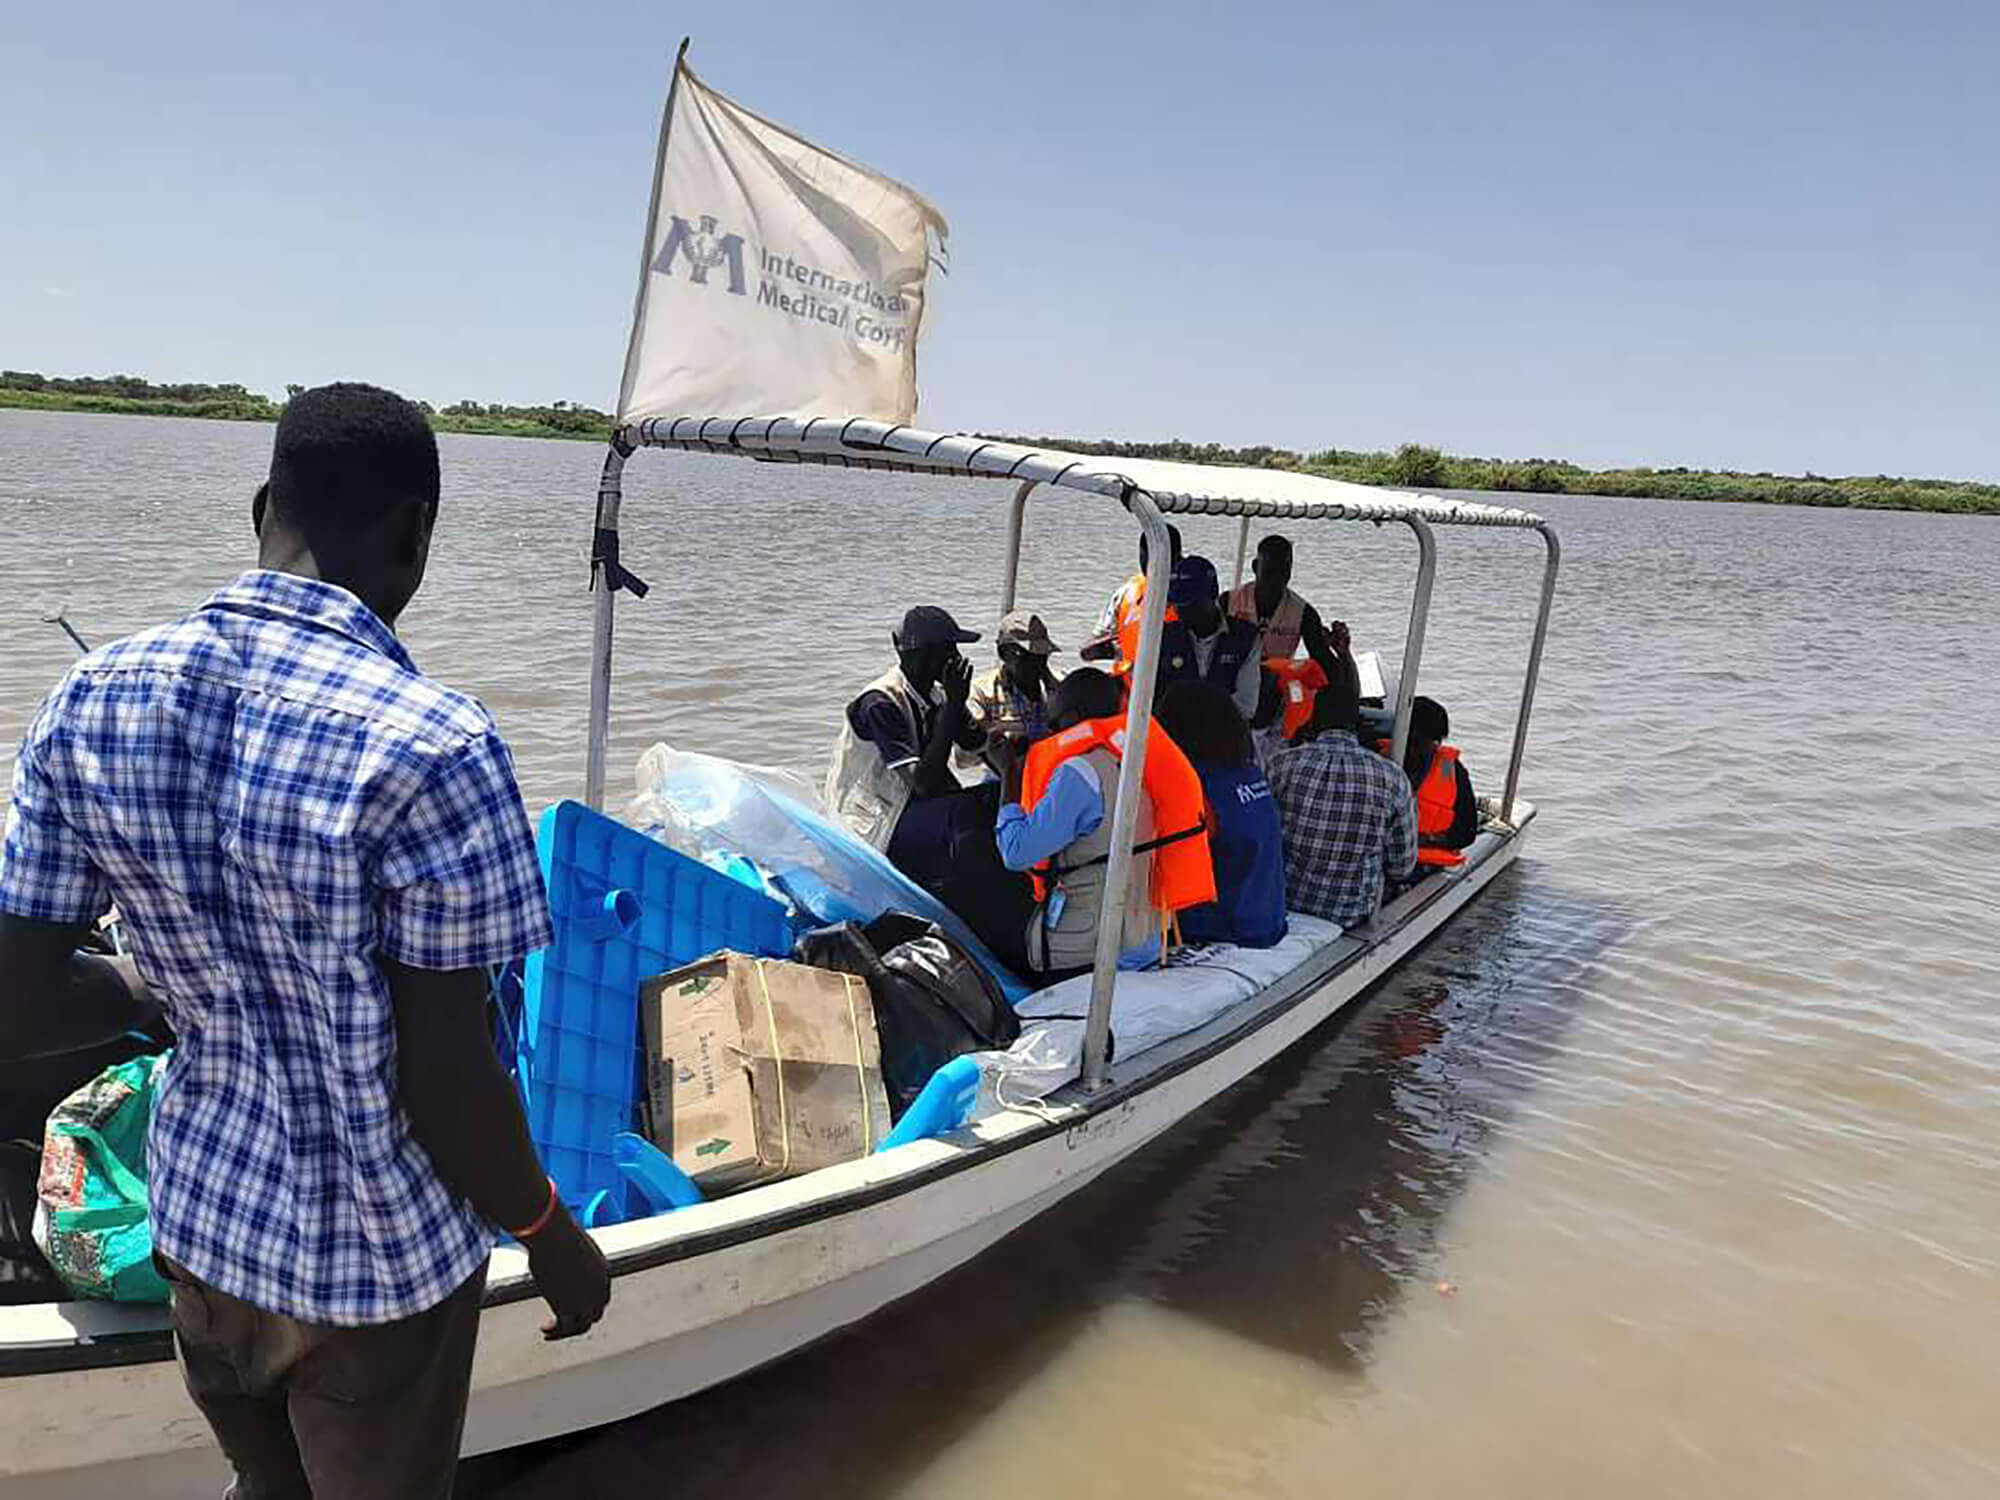 In April, our team traveled by boat from Malakal to Renk to help Sudanese refugees fleeing the conflict and attempting to cross into South Sudan.